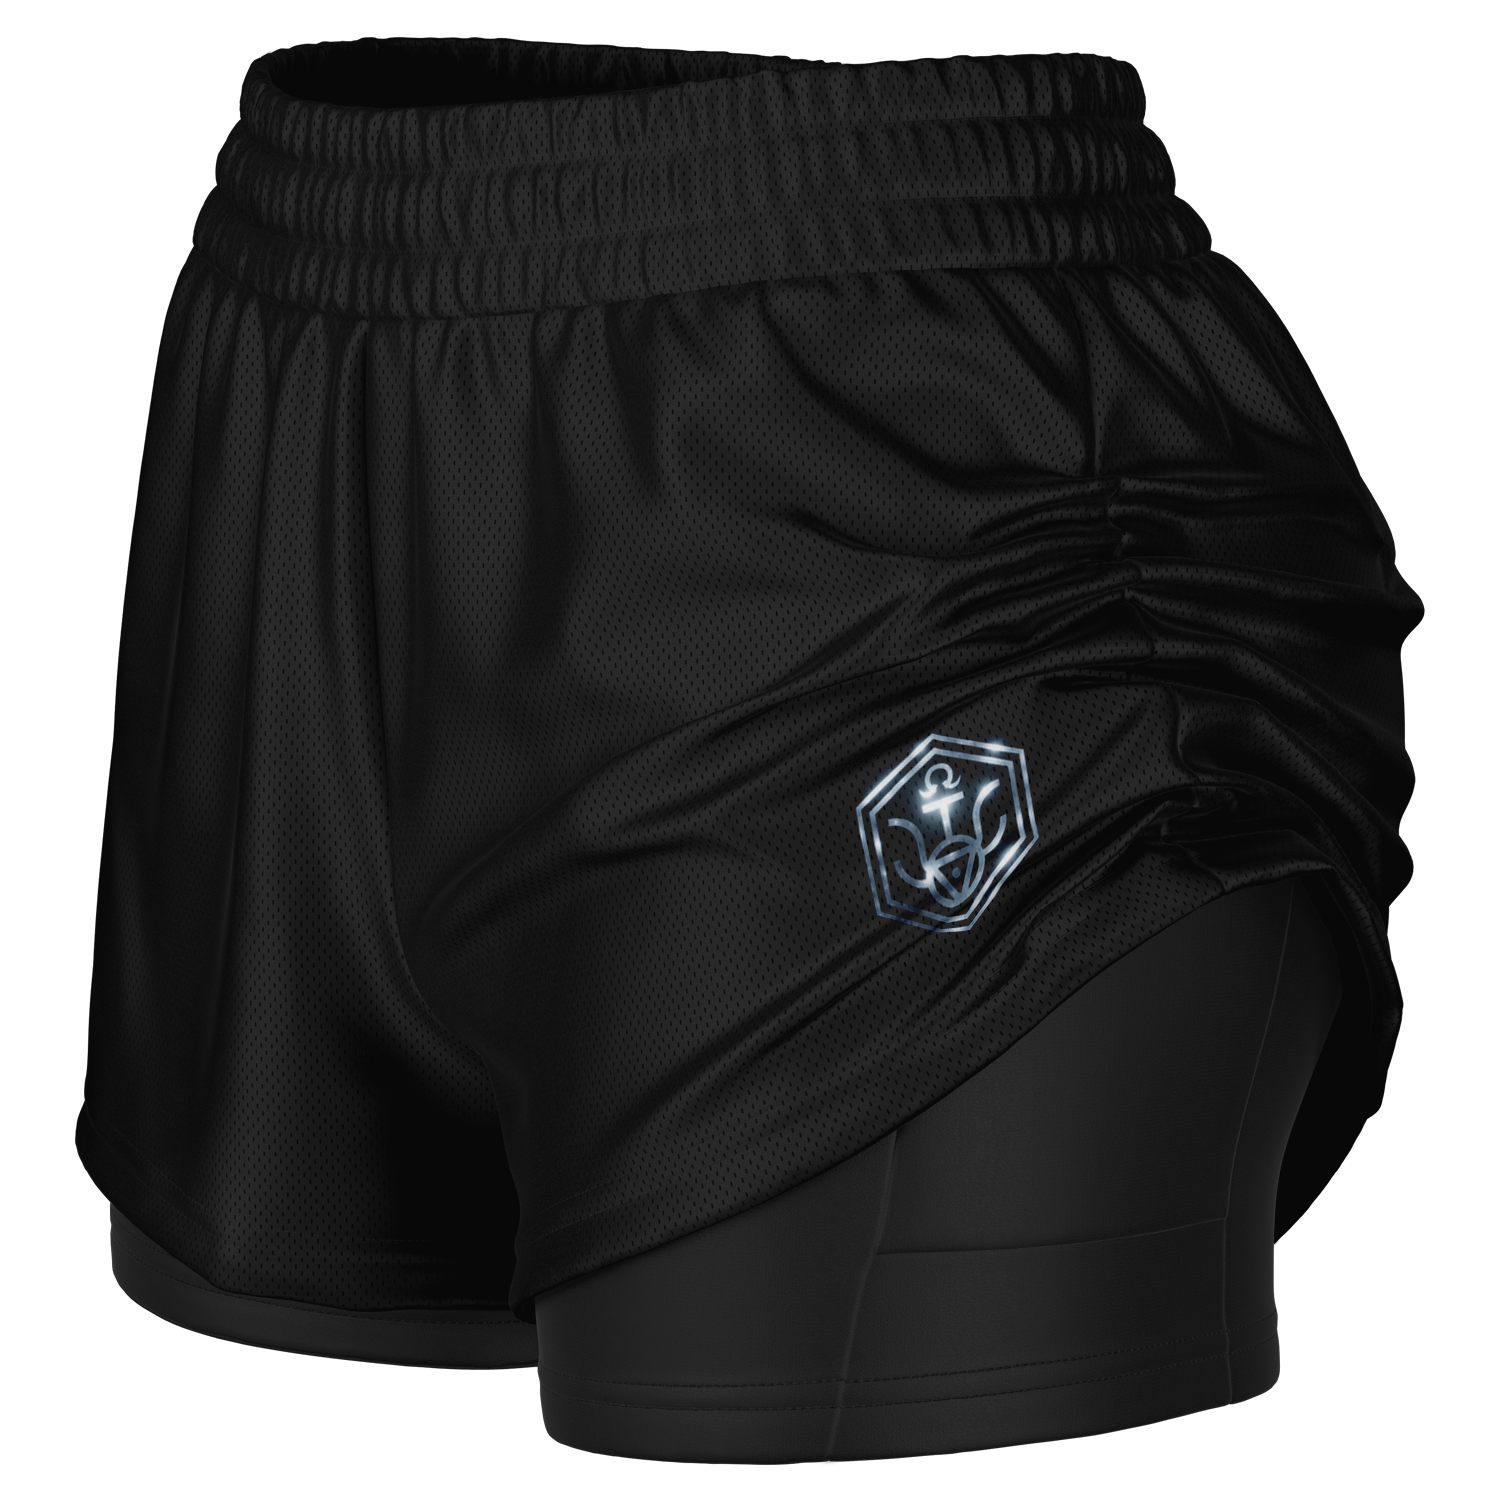 WRWC Signature Black ~ 2022 Dual-Layer Shorts - Who R We Collective